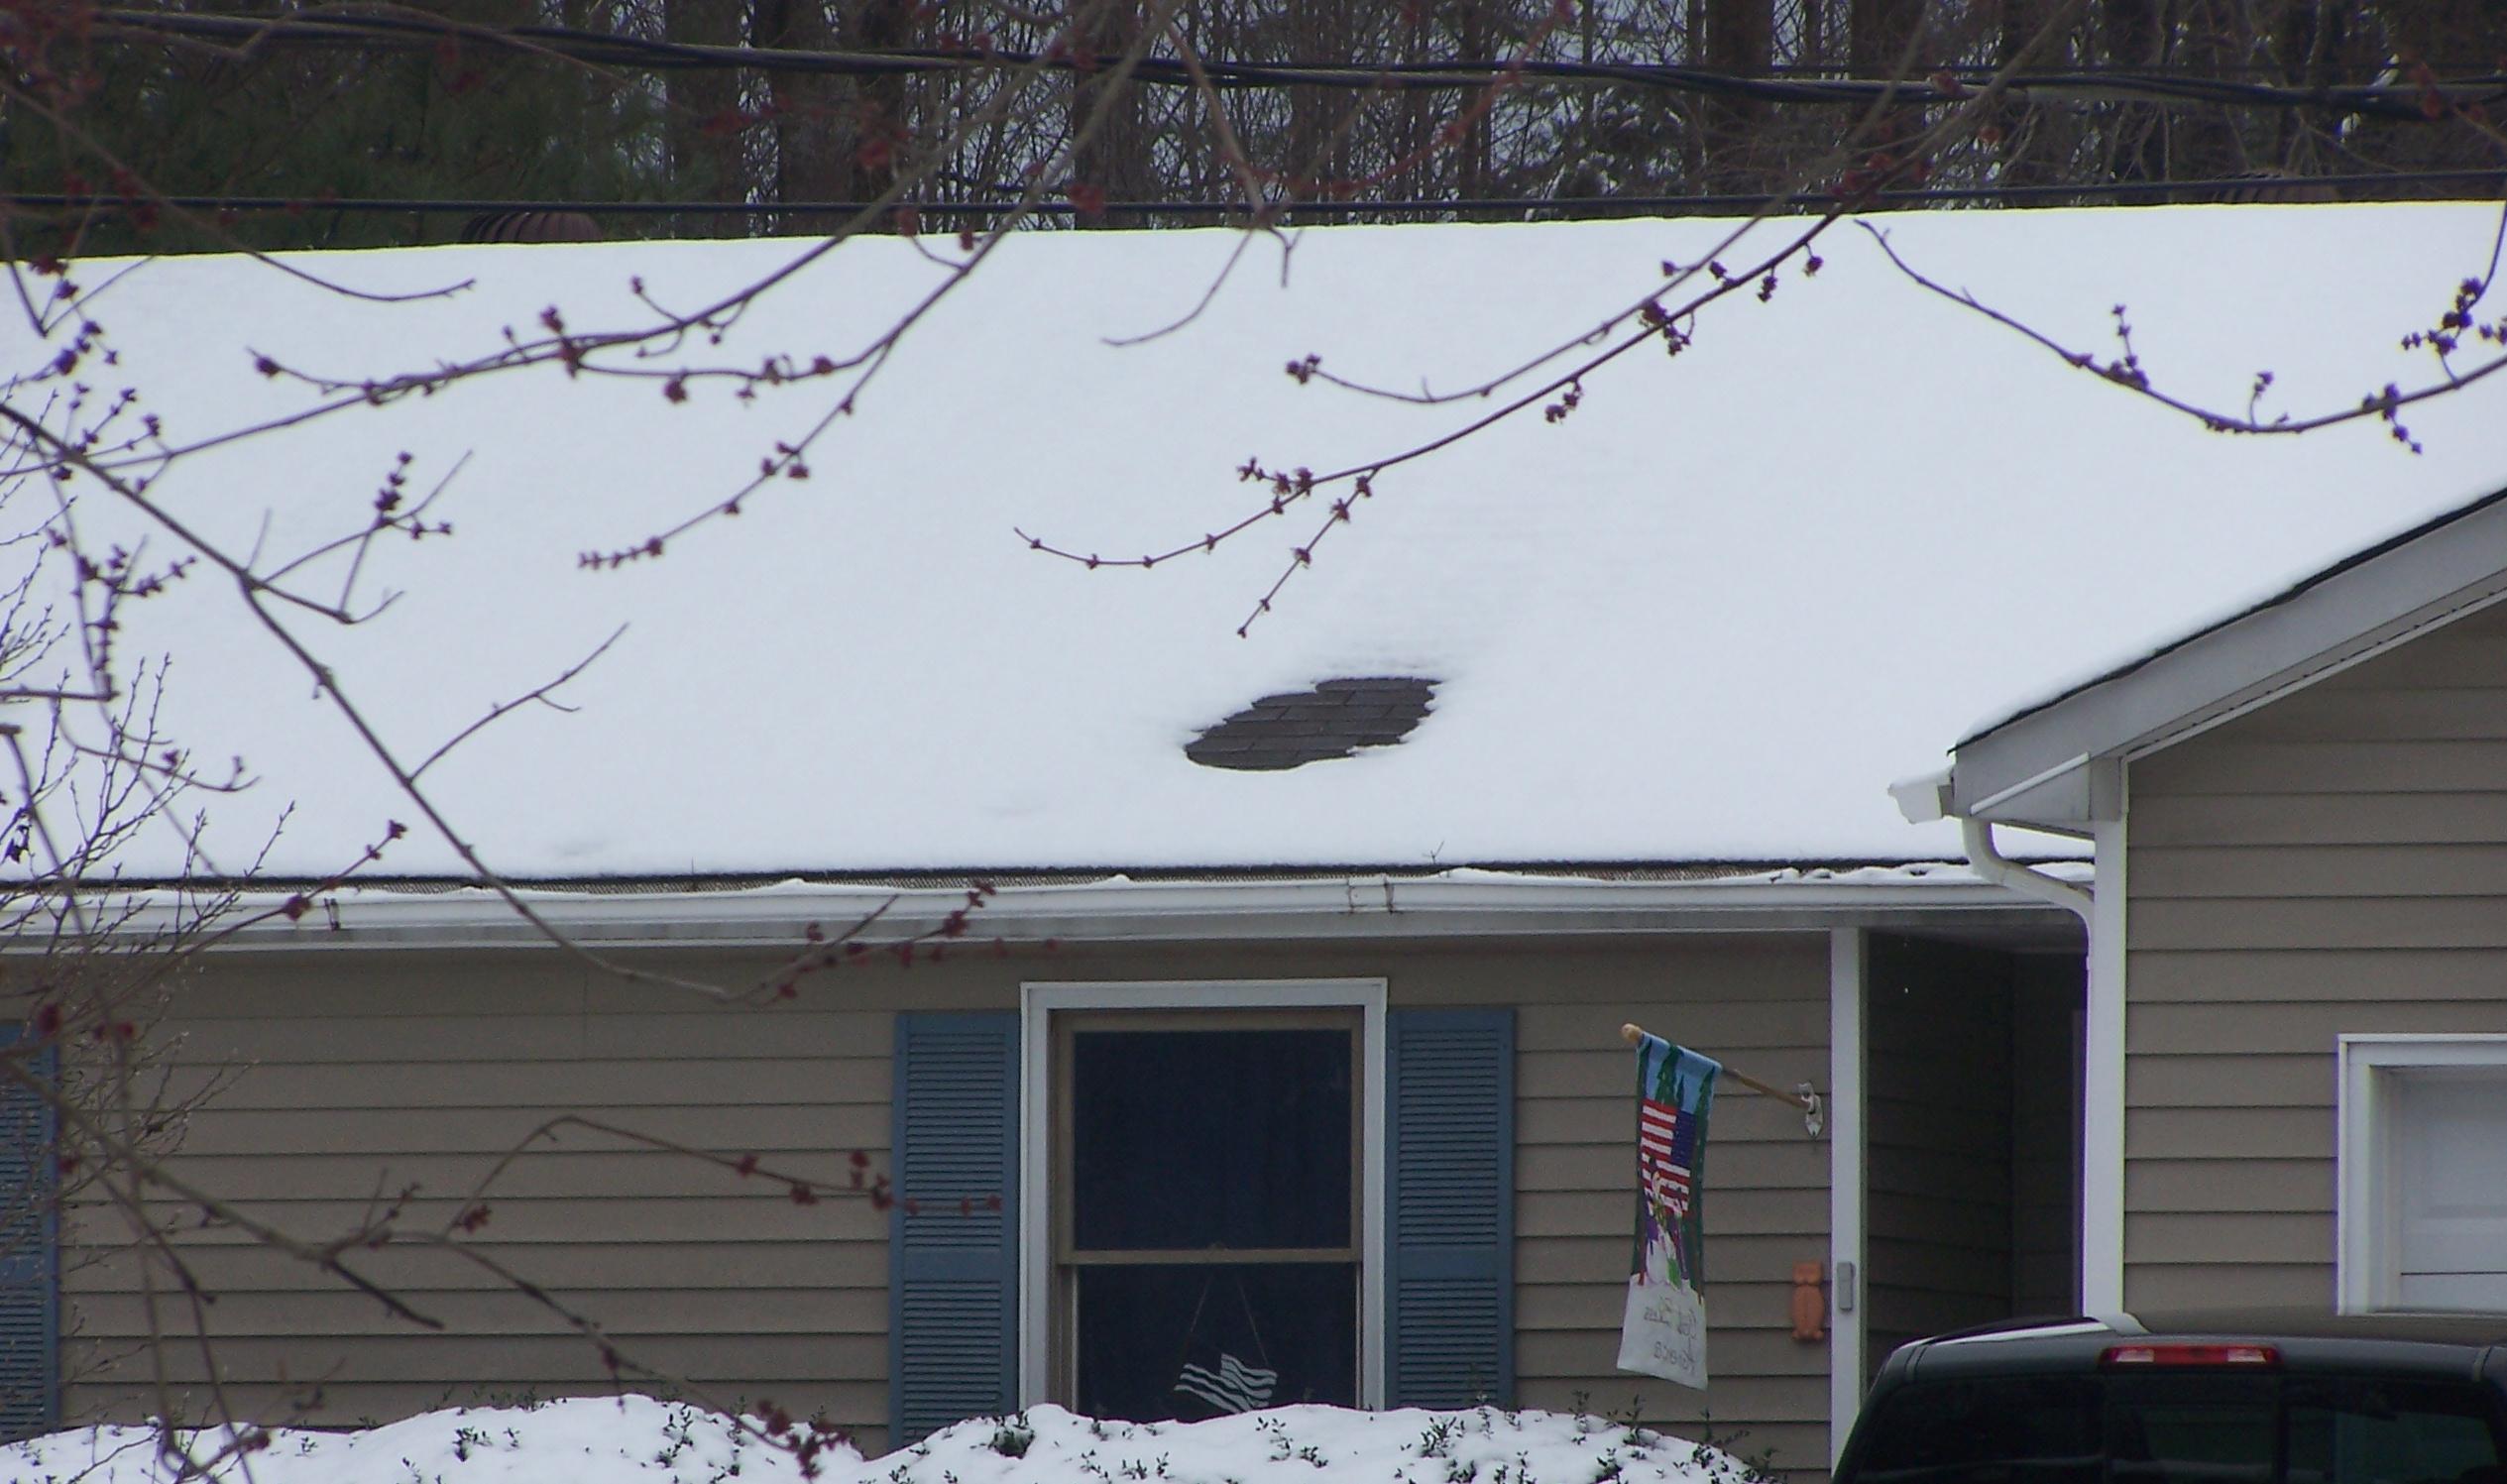 Duct leakage melting snow on roof